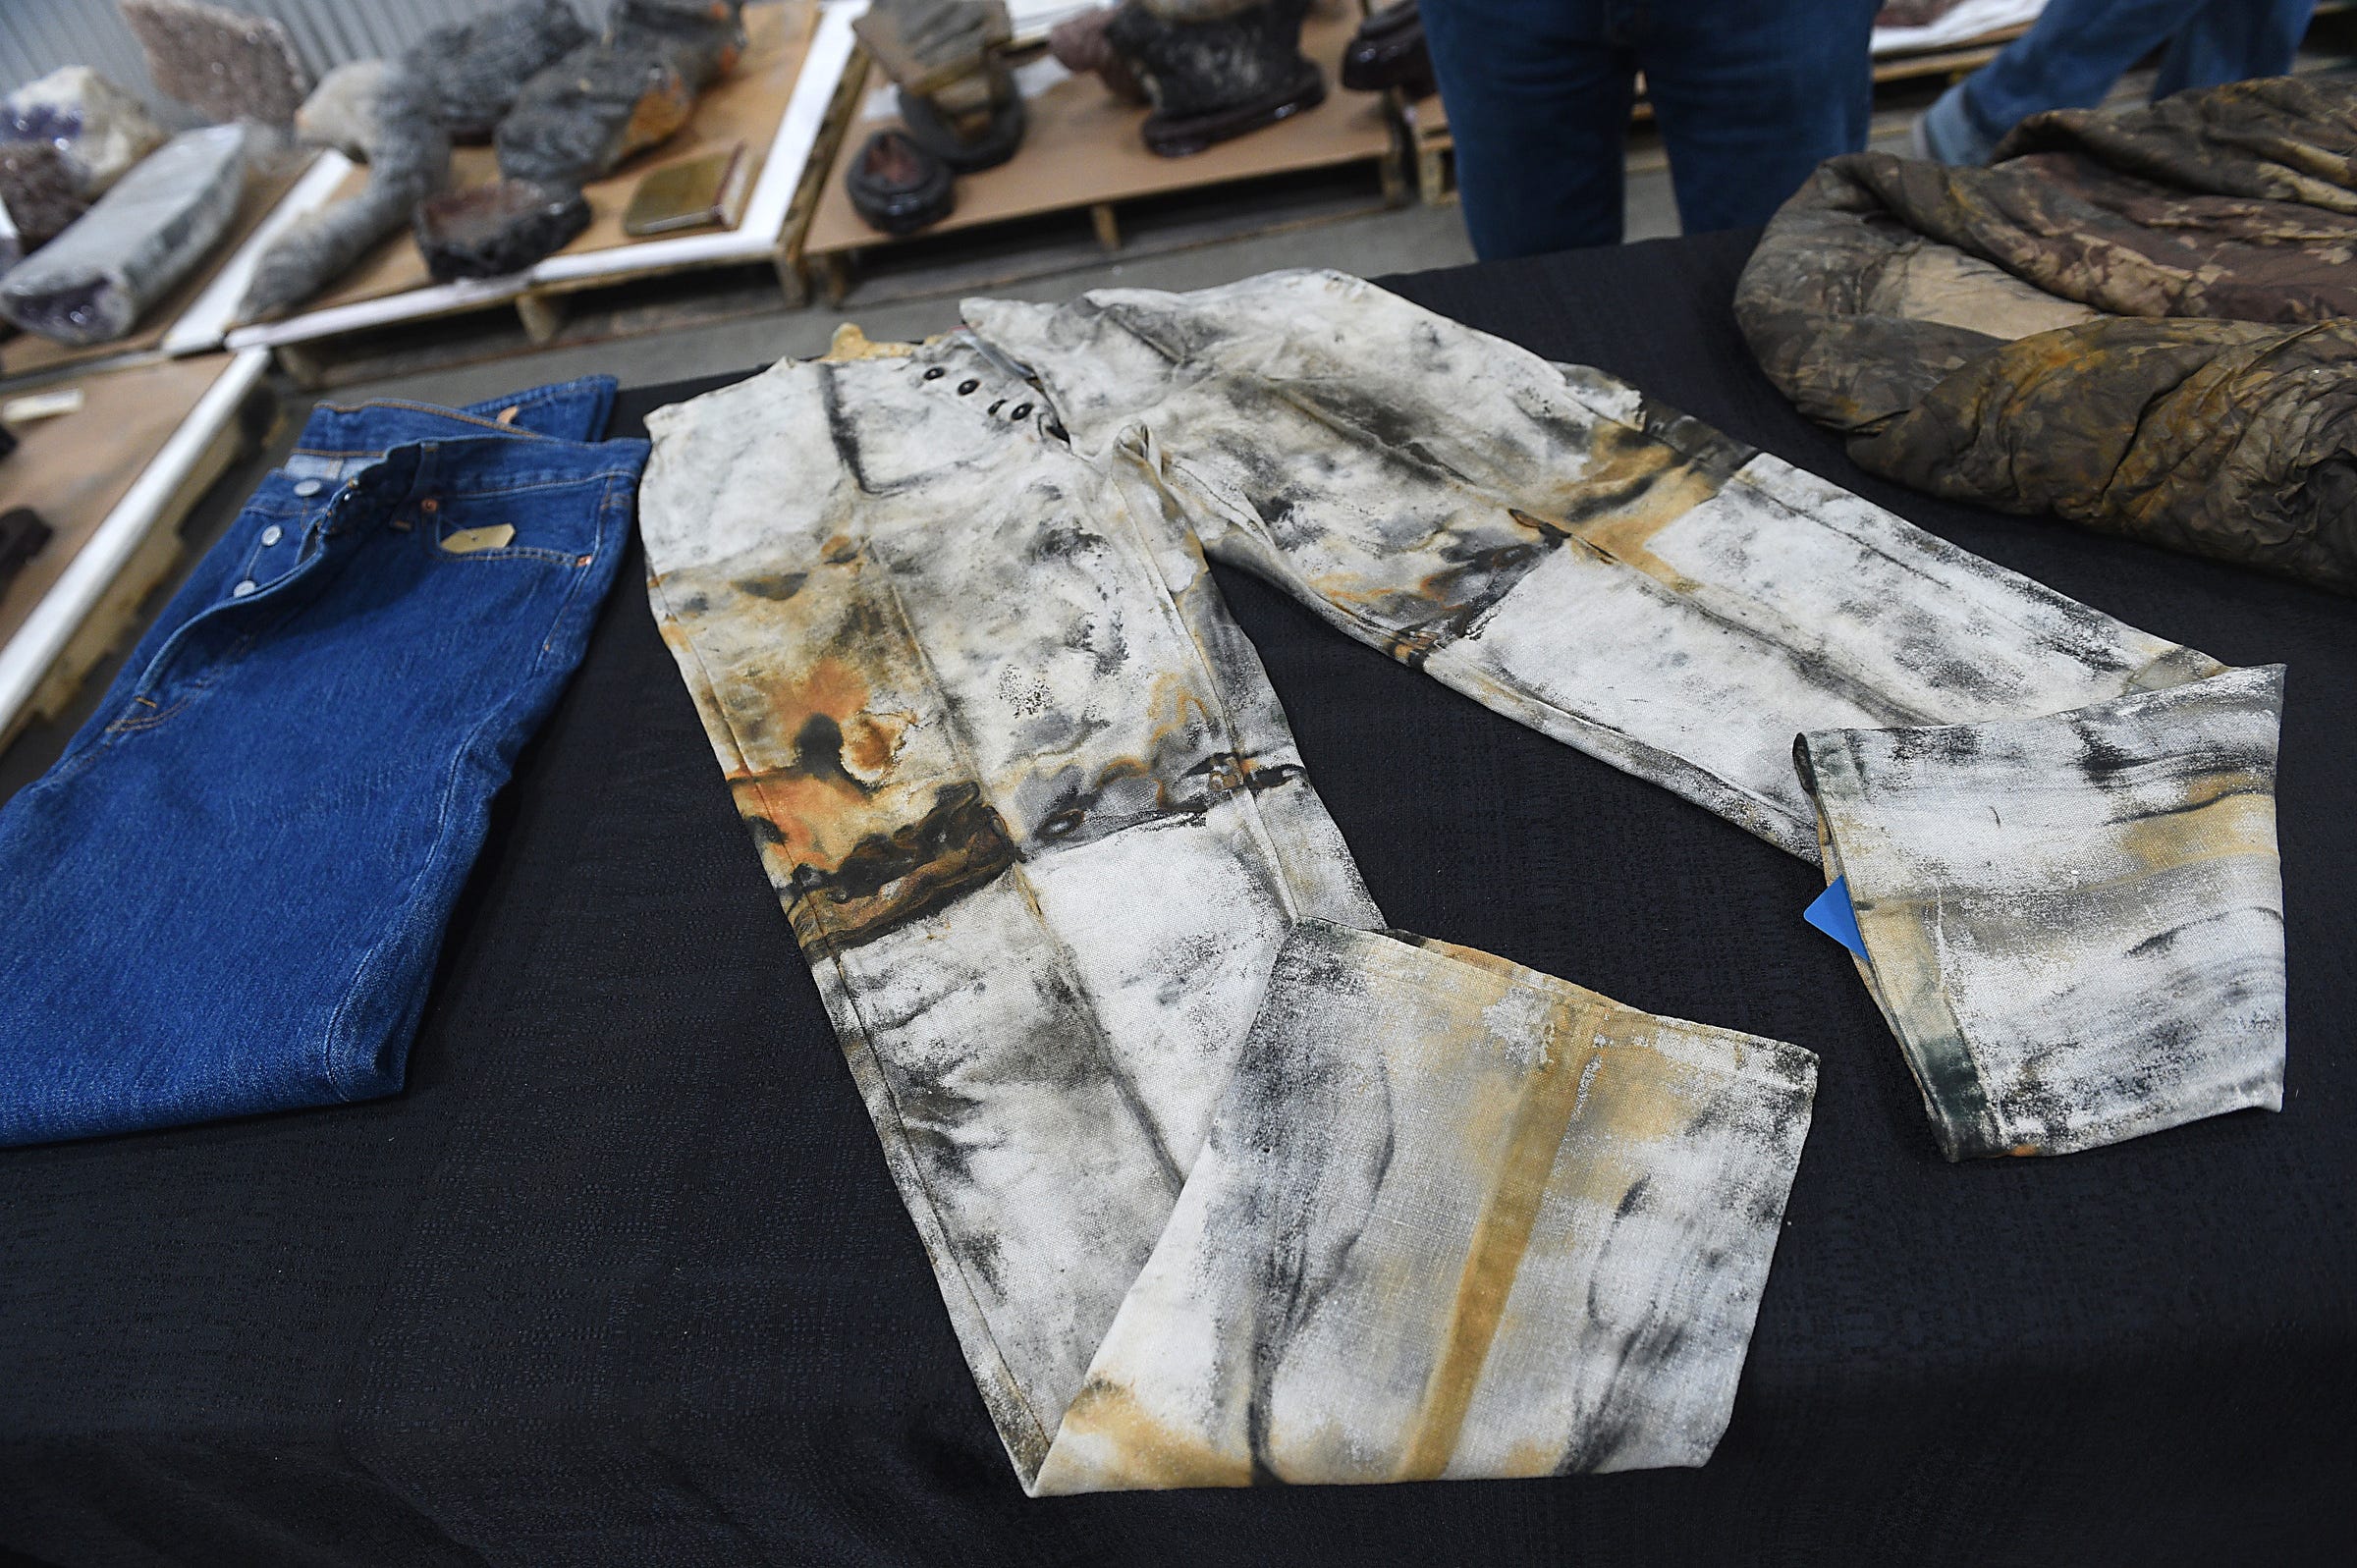 Oldest jeans in world? Pants from 1857 shipwreck fetch $114K in Reno ...